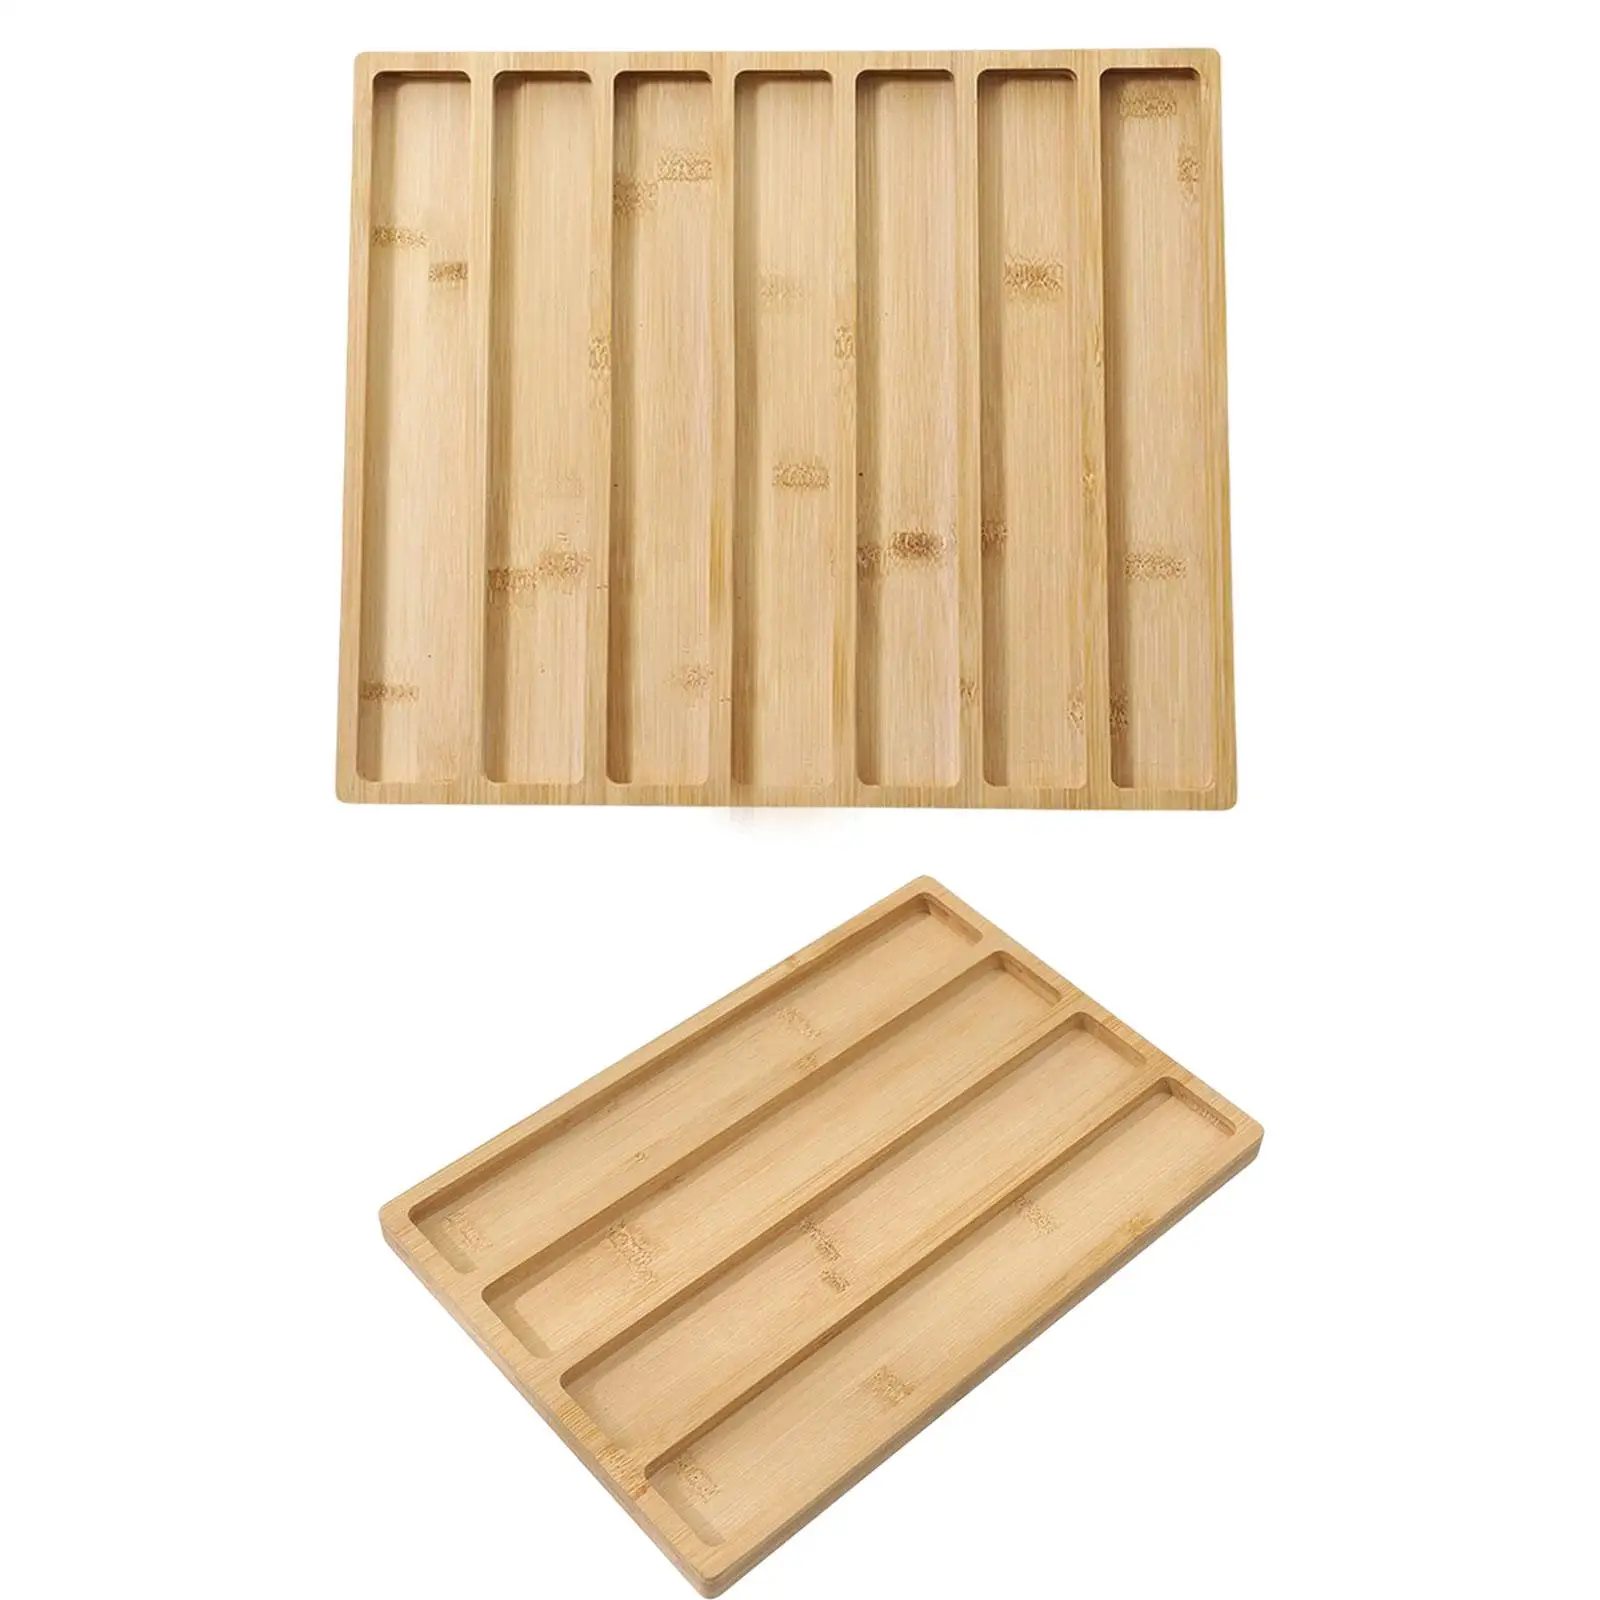 Measuring Tool Accessories wooden bamboo Bead Board For DIY Bracelet  Necklace Beading Jewelry Making Organizer Tray Design Craft